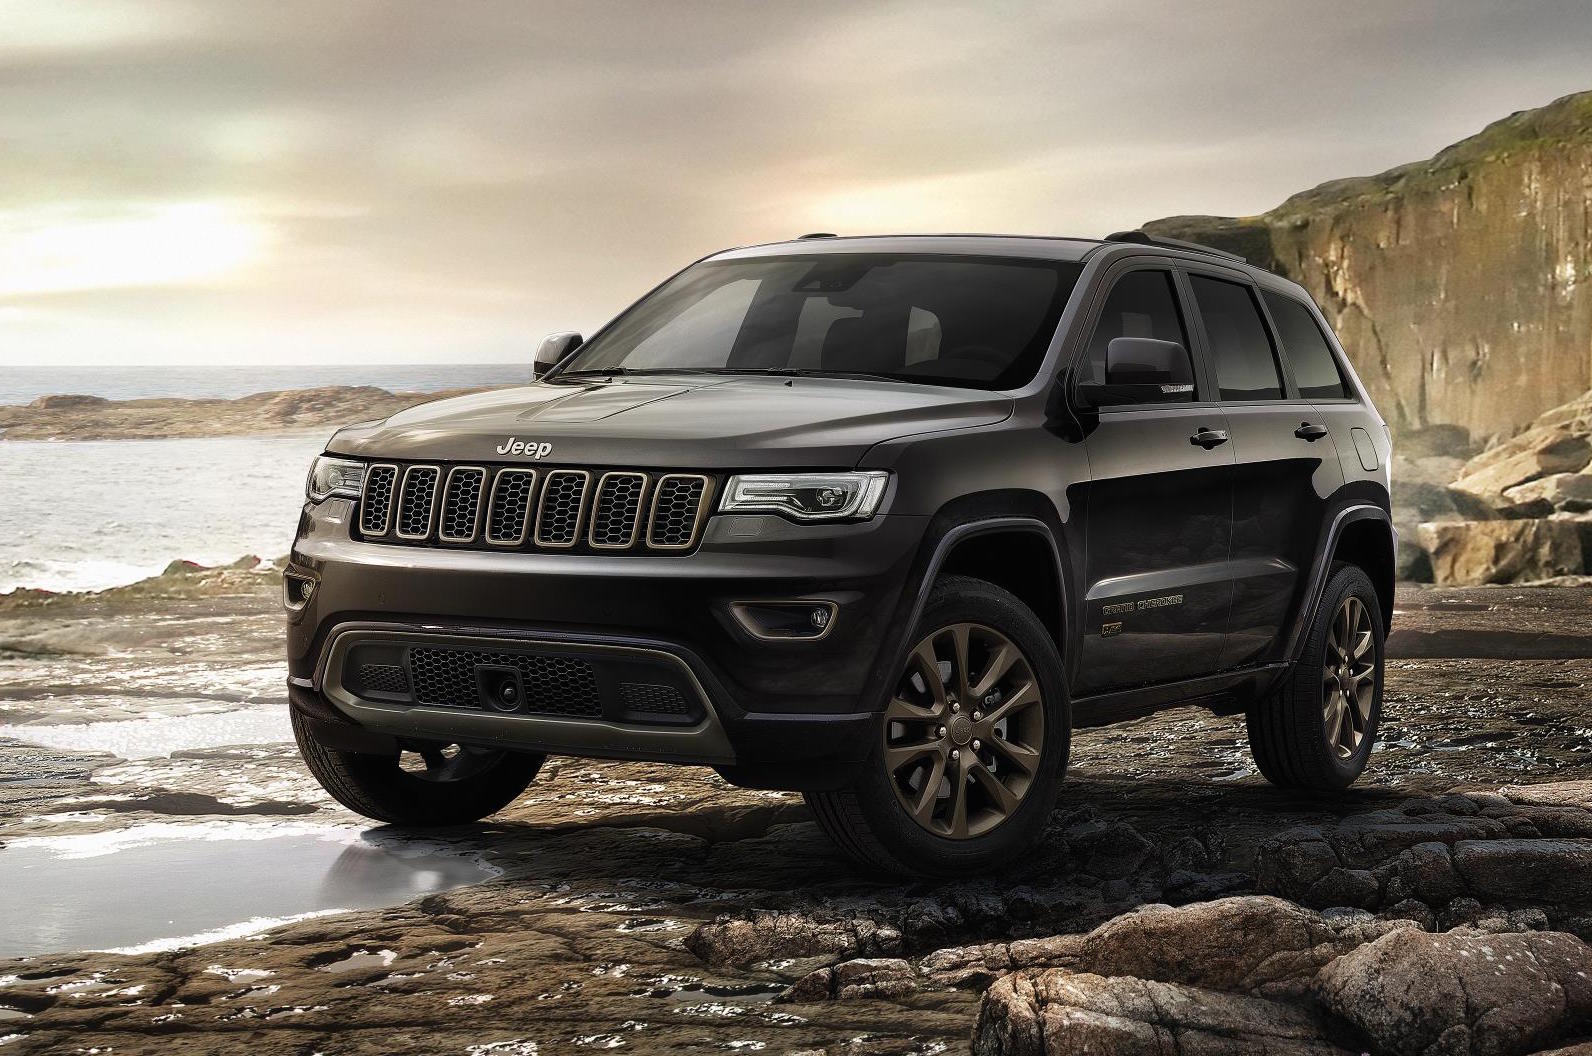 2017 Jeep Grand Cherokee gets new shifter, electric steering, stop-start